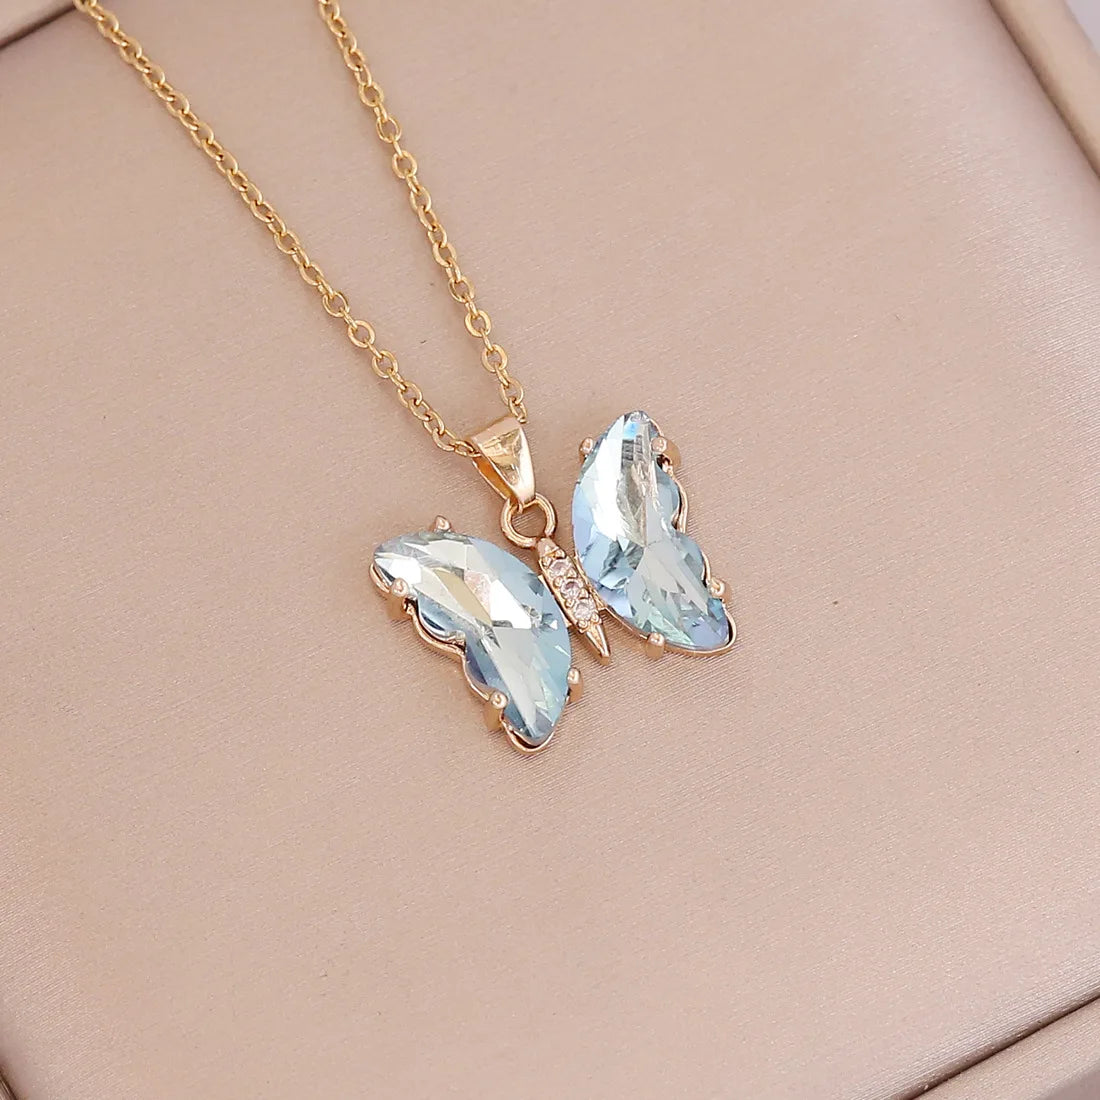 Revamp of Fashionable Personality: Gradient Butterfly Pendant Necklace for Women